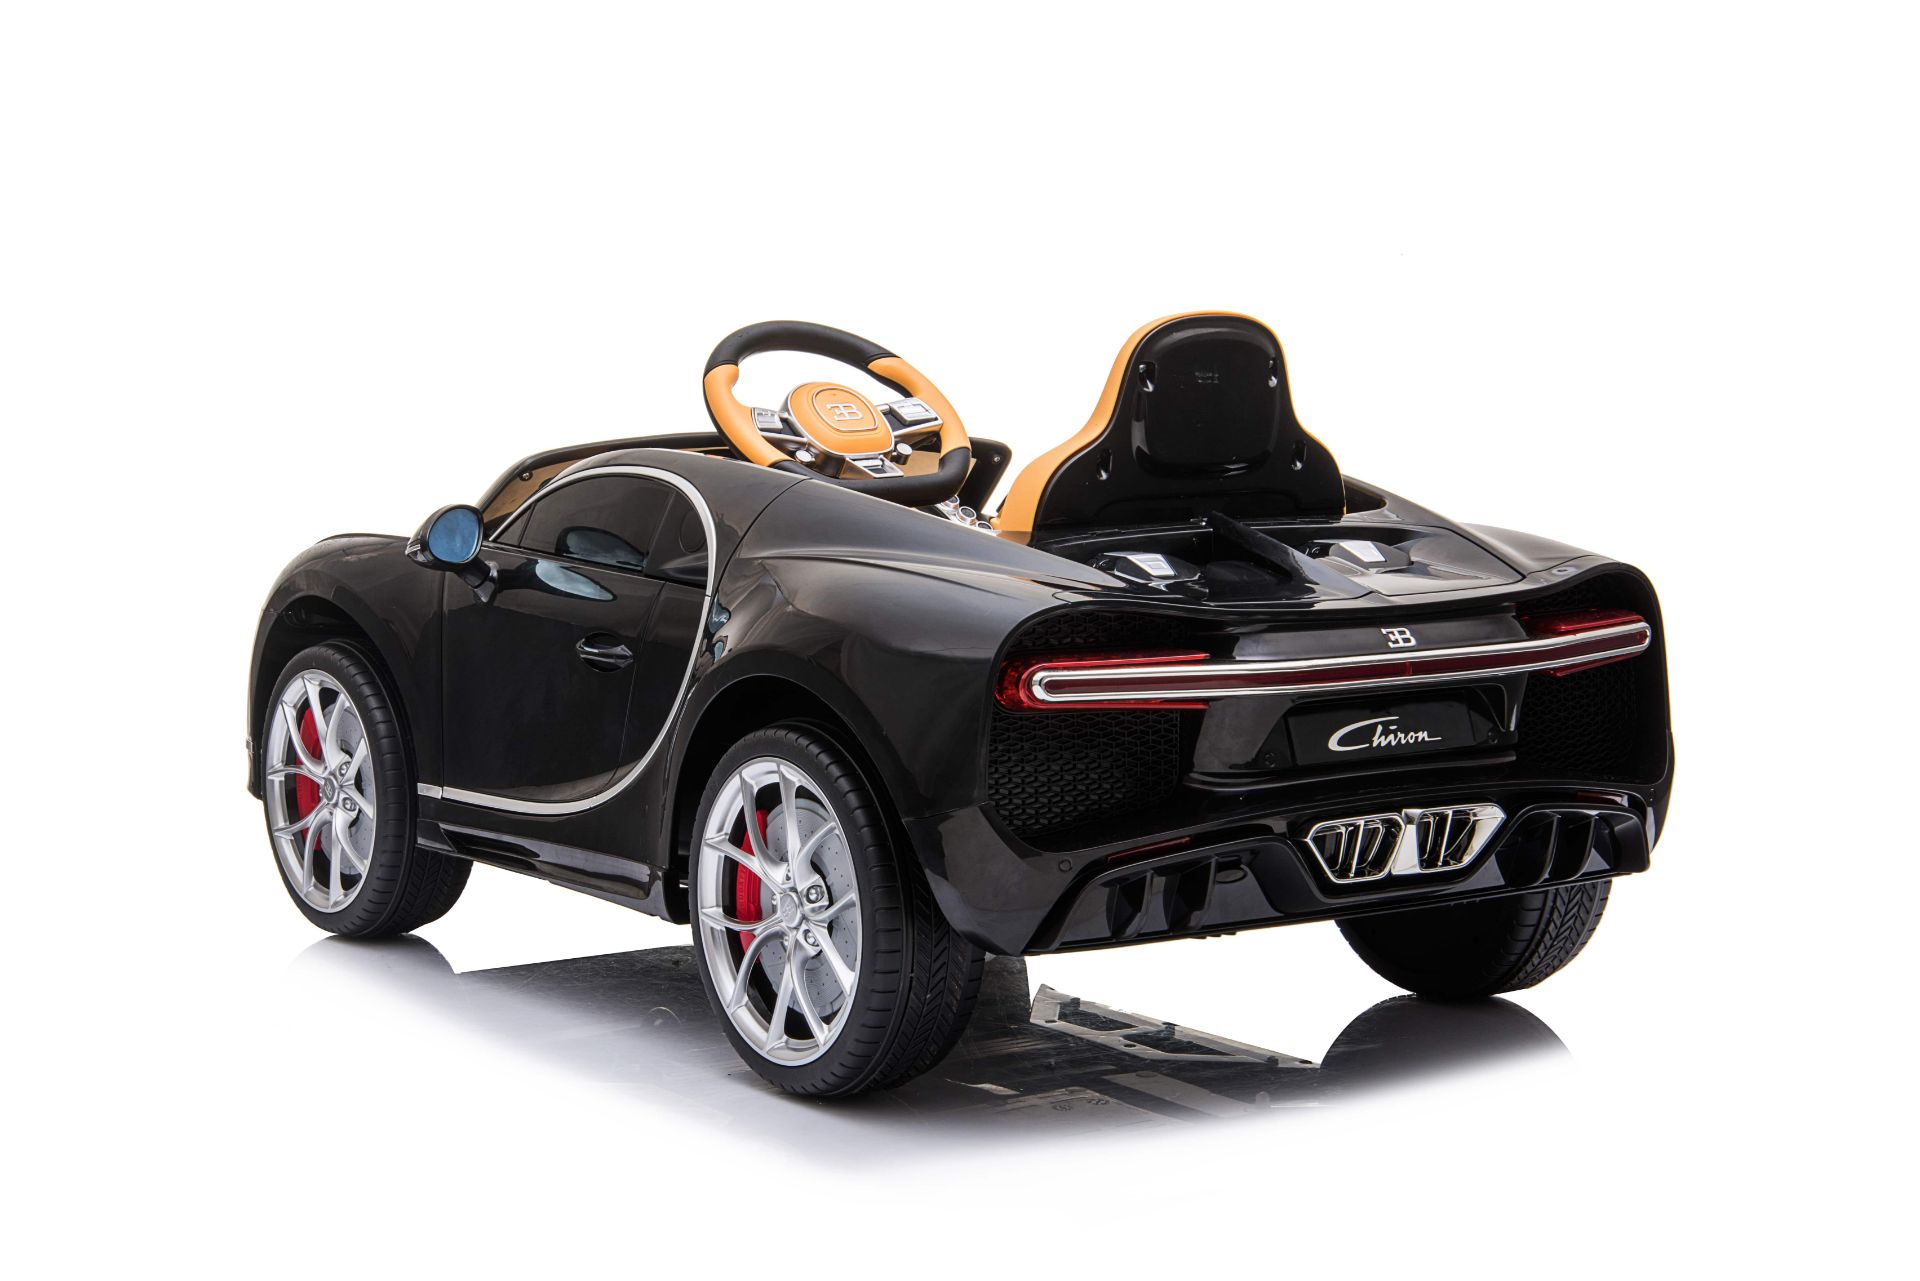 RIDE ON FULLY LICENCED BUGATTI CHIRON 12V WITH PARENTAL REMOTE CONTROL - BLACK - Image 3 of 7